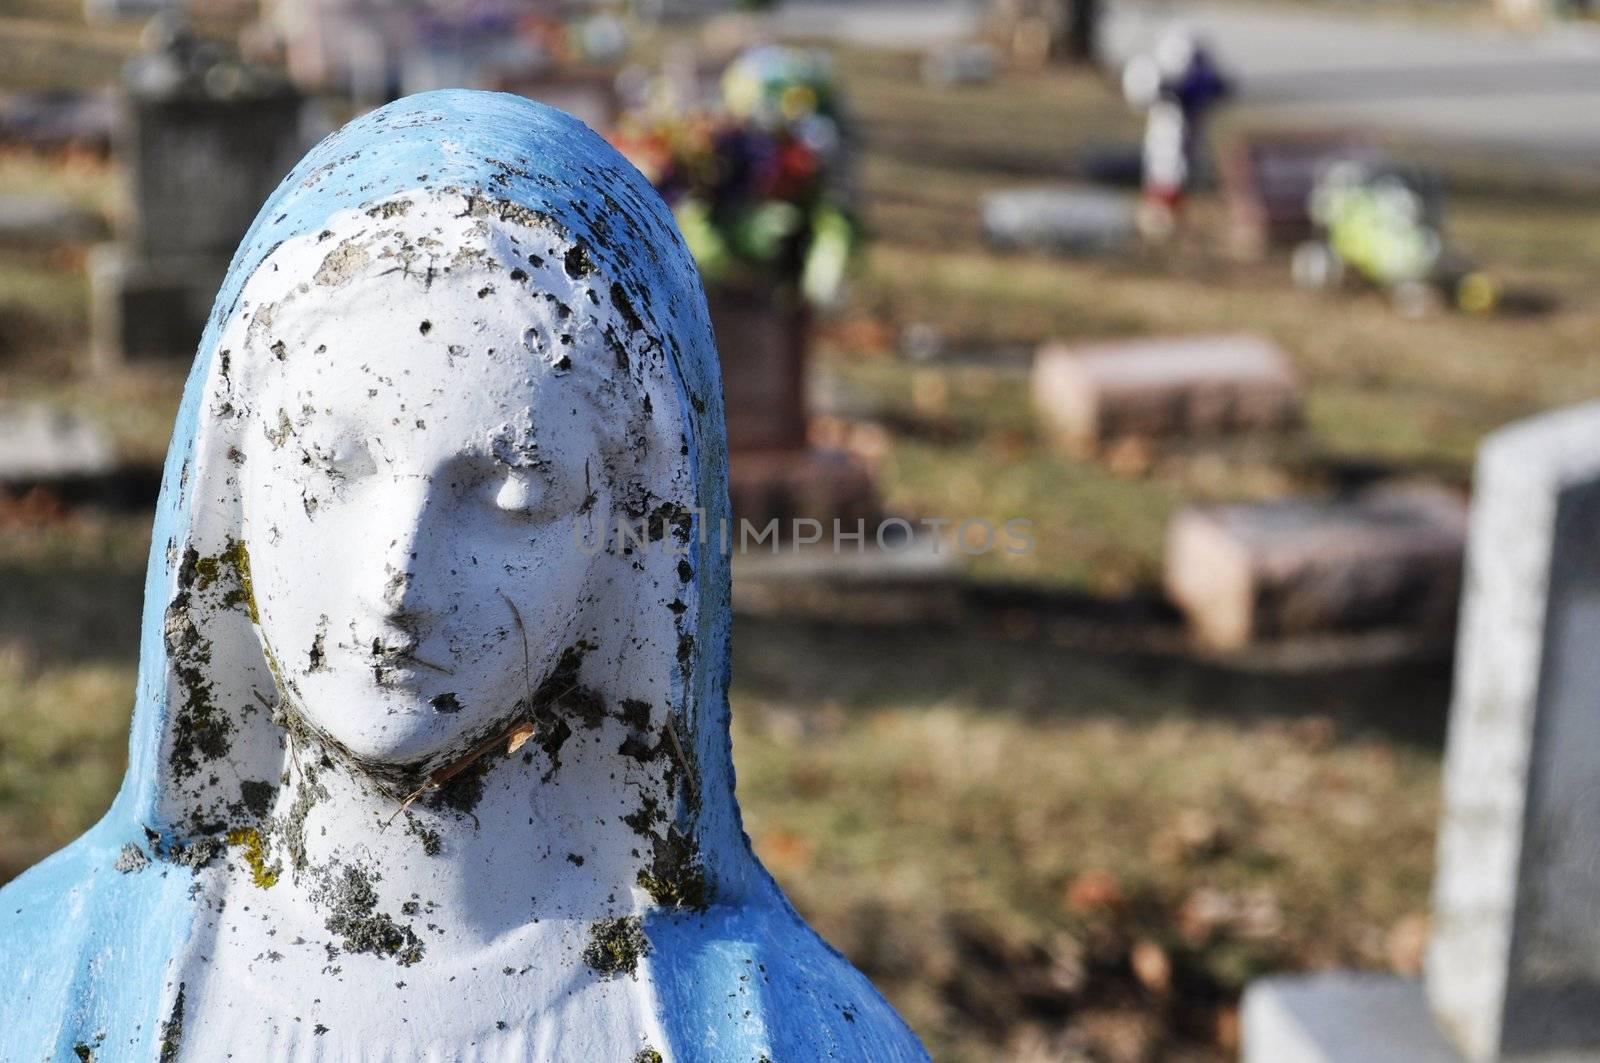 Gravesite - Mary statue - background - close-up